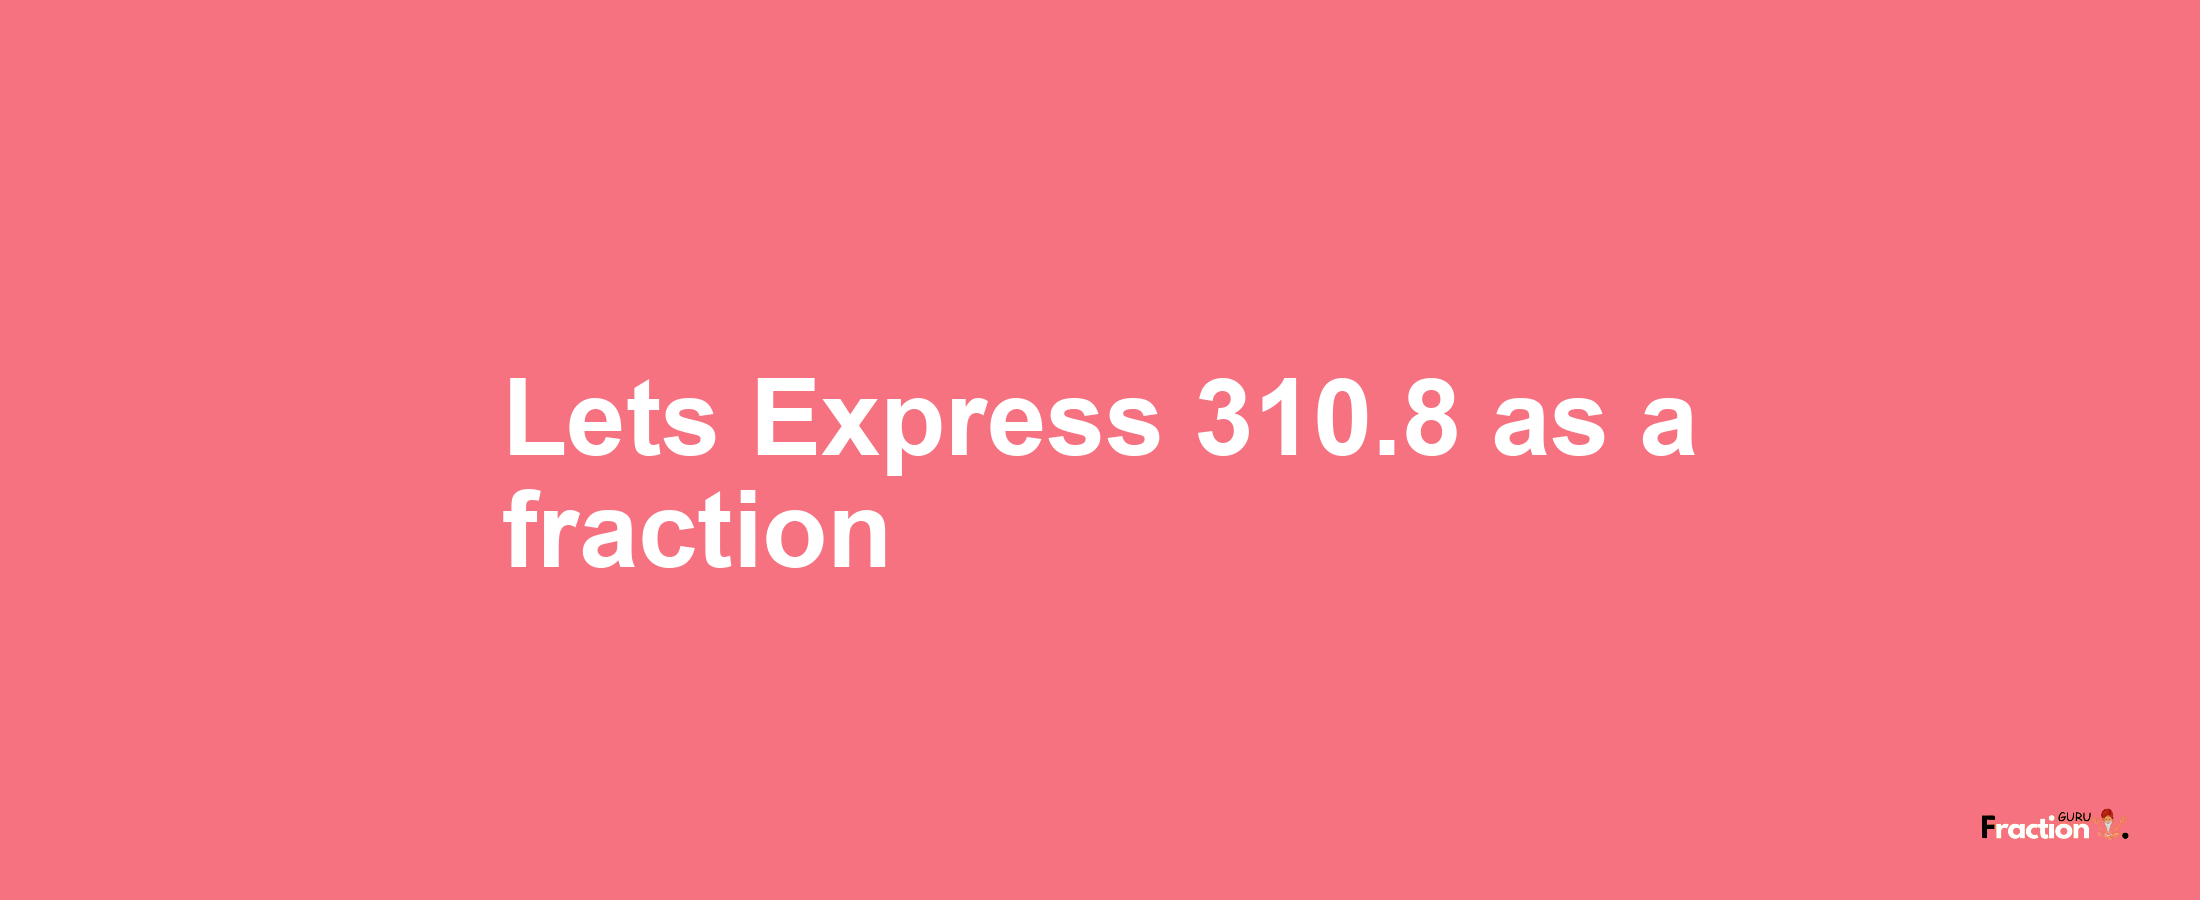 Lets Express 310.8 as afraction